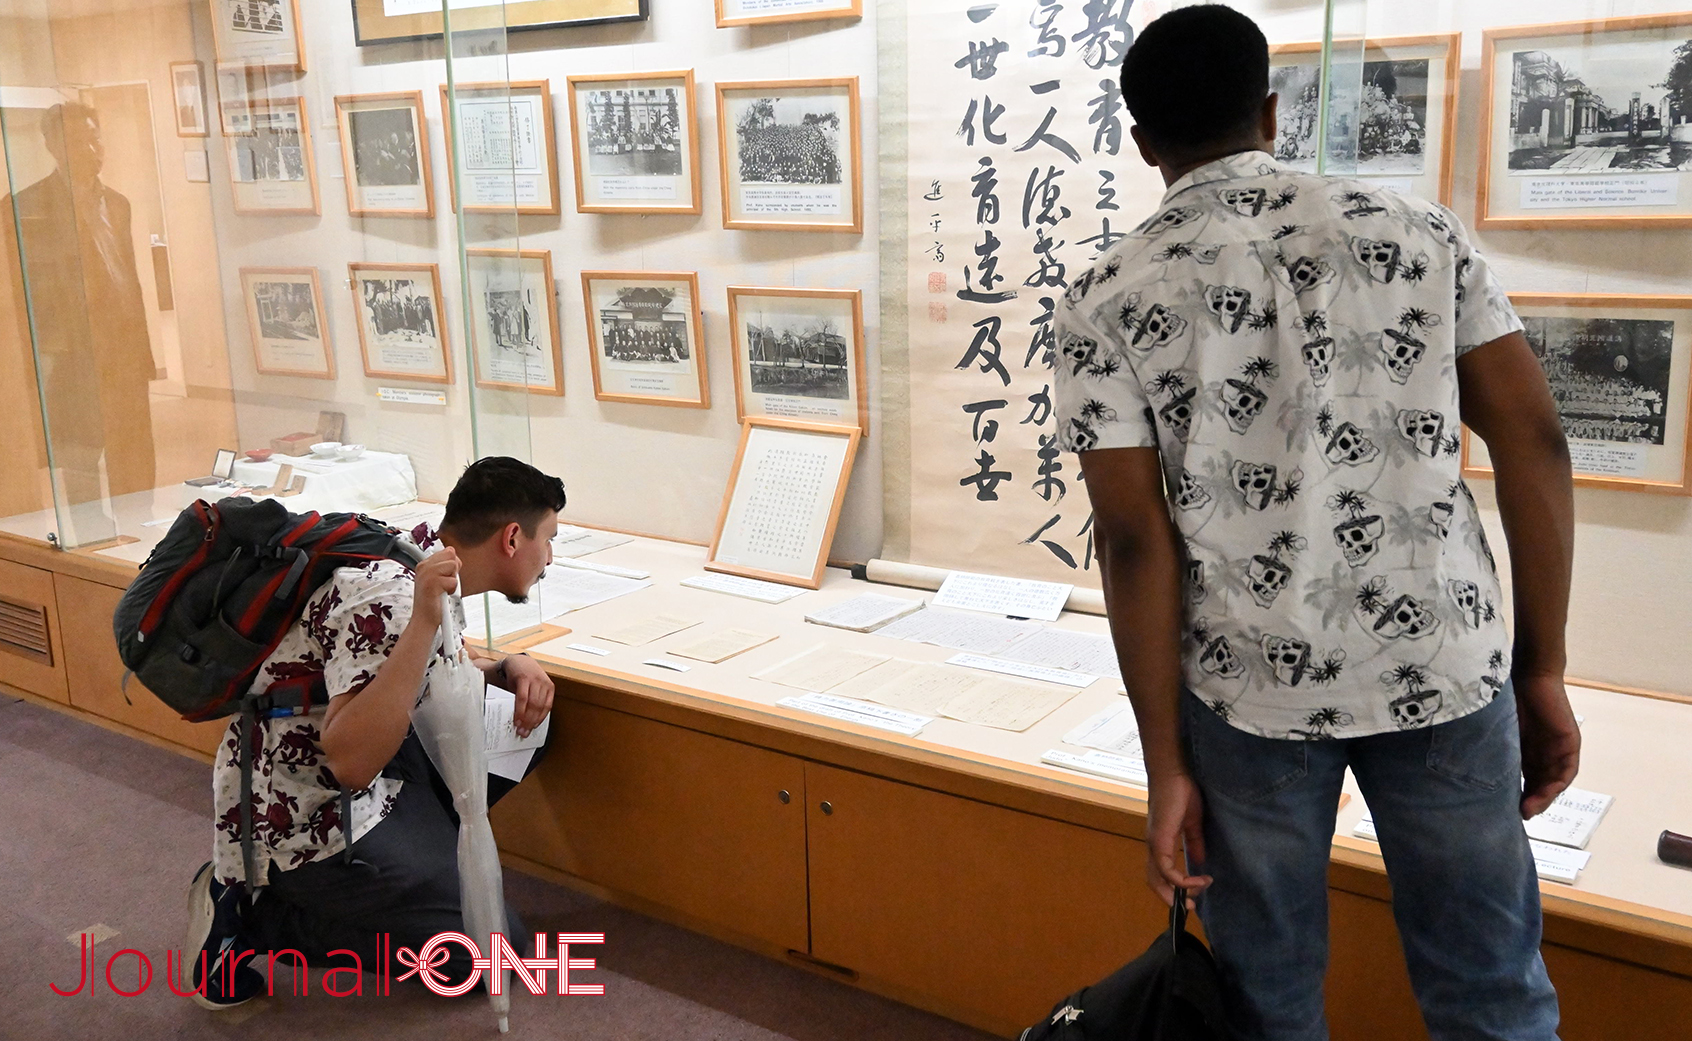 Tourists from USA came to see the museum; Photo by Journal-ONE